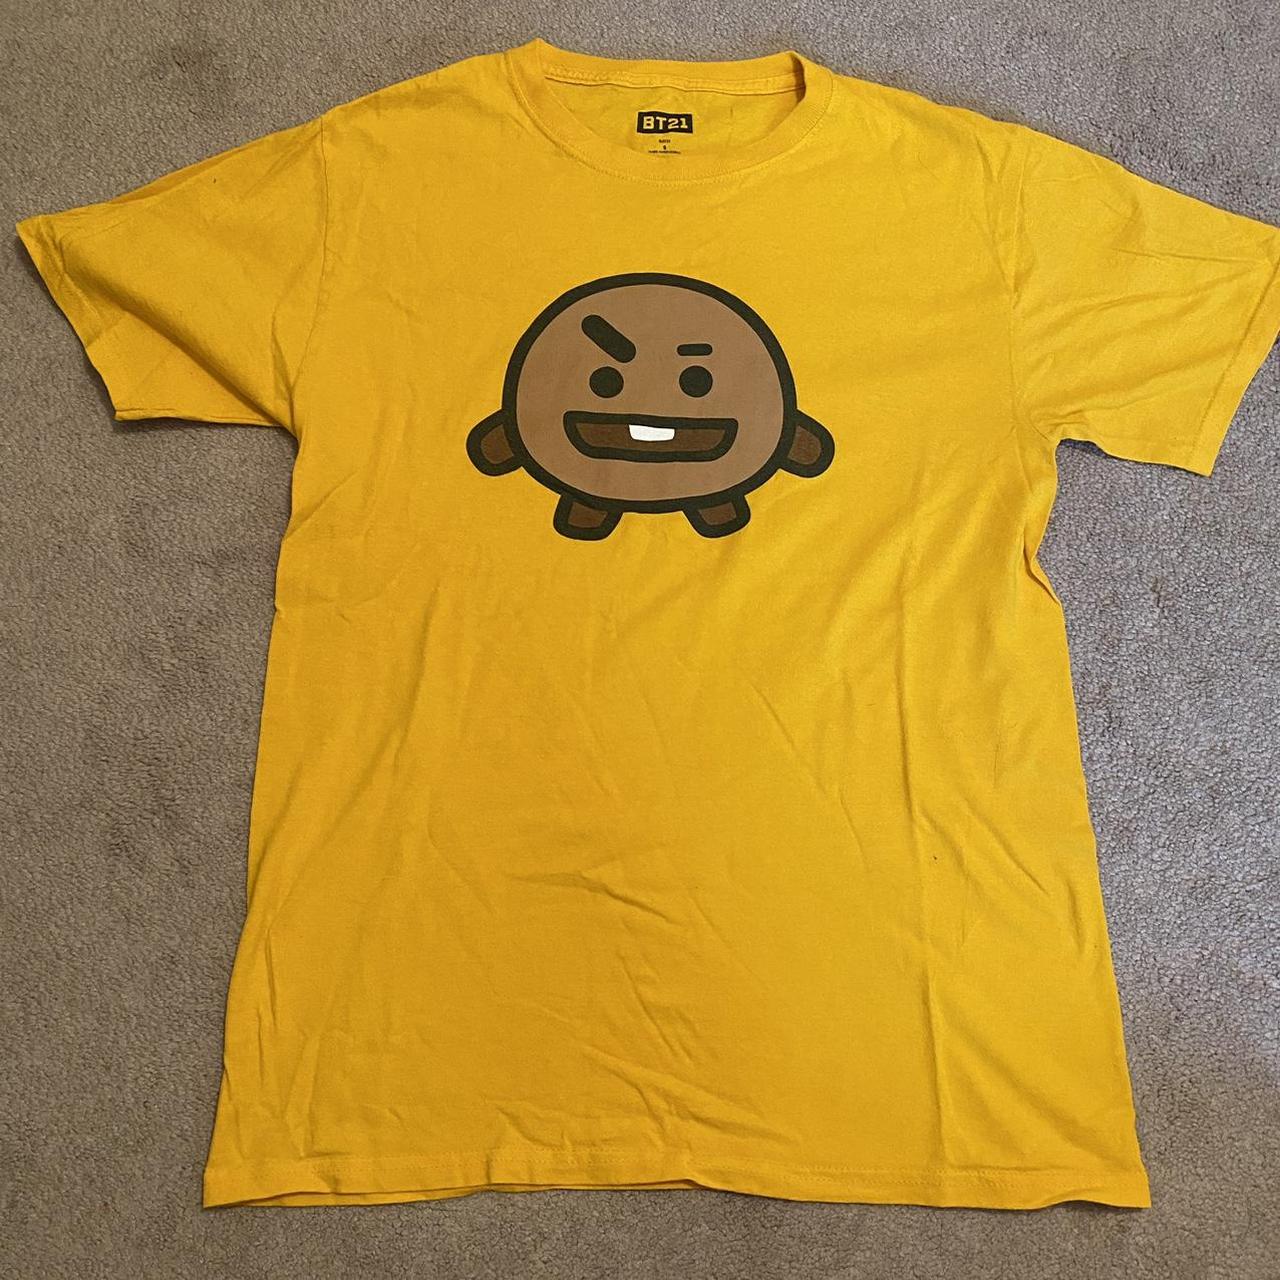 bt21 shooky yellow t shirt bought this from hot - Depop